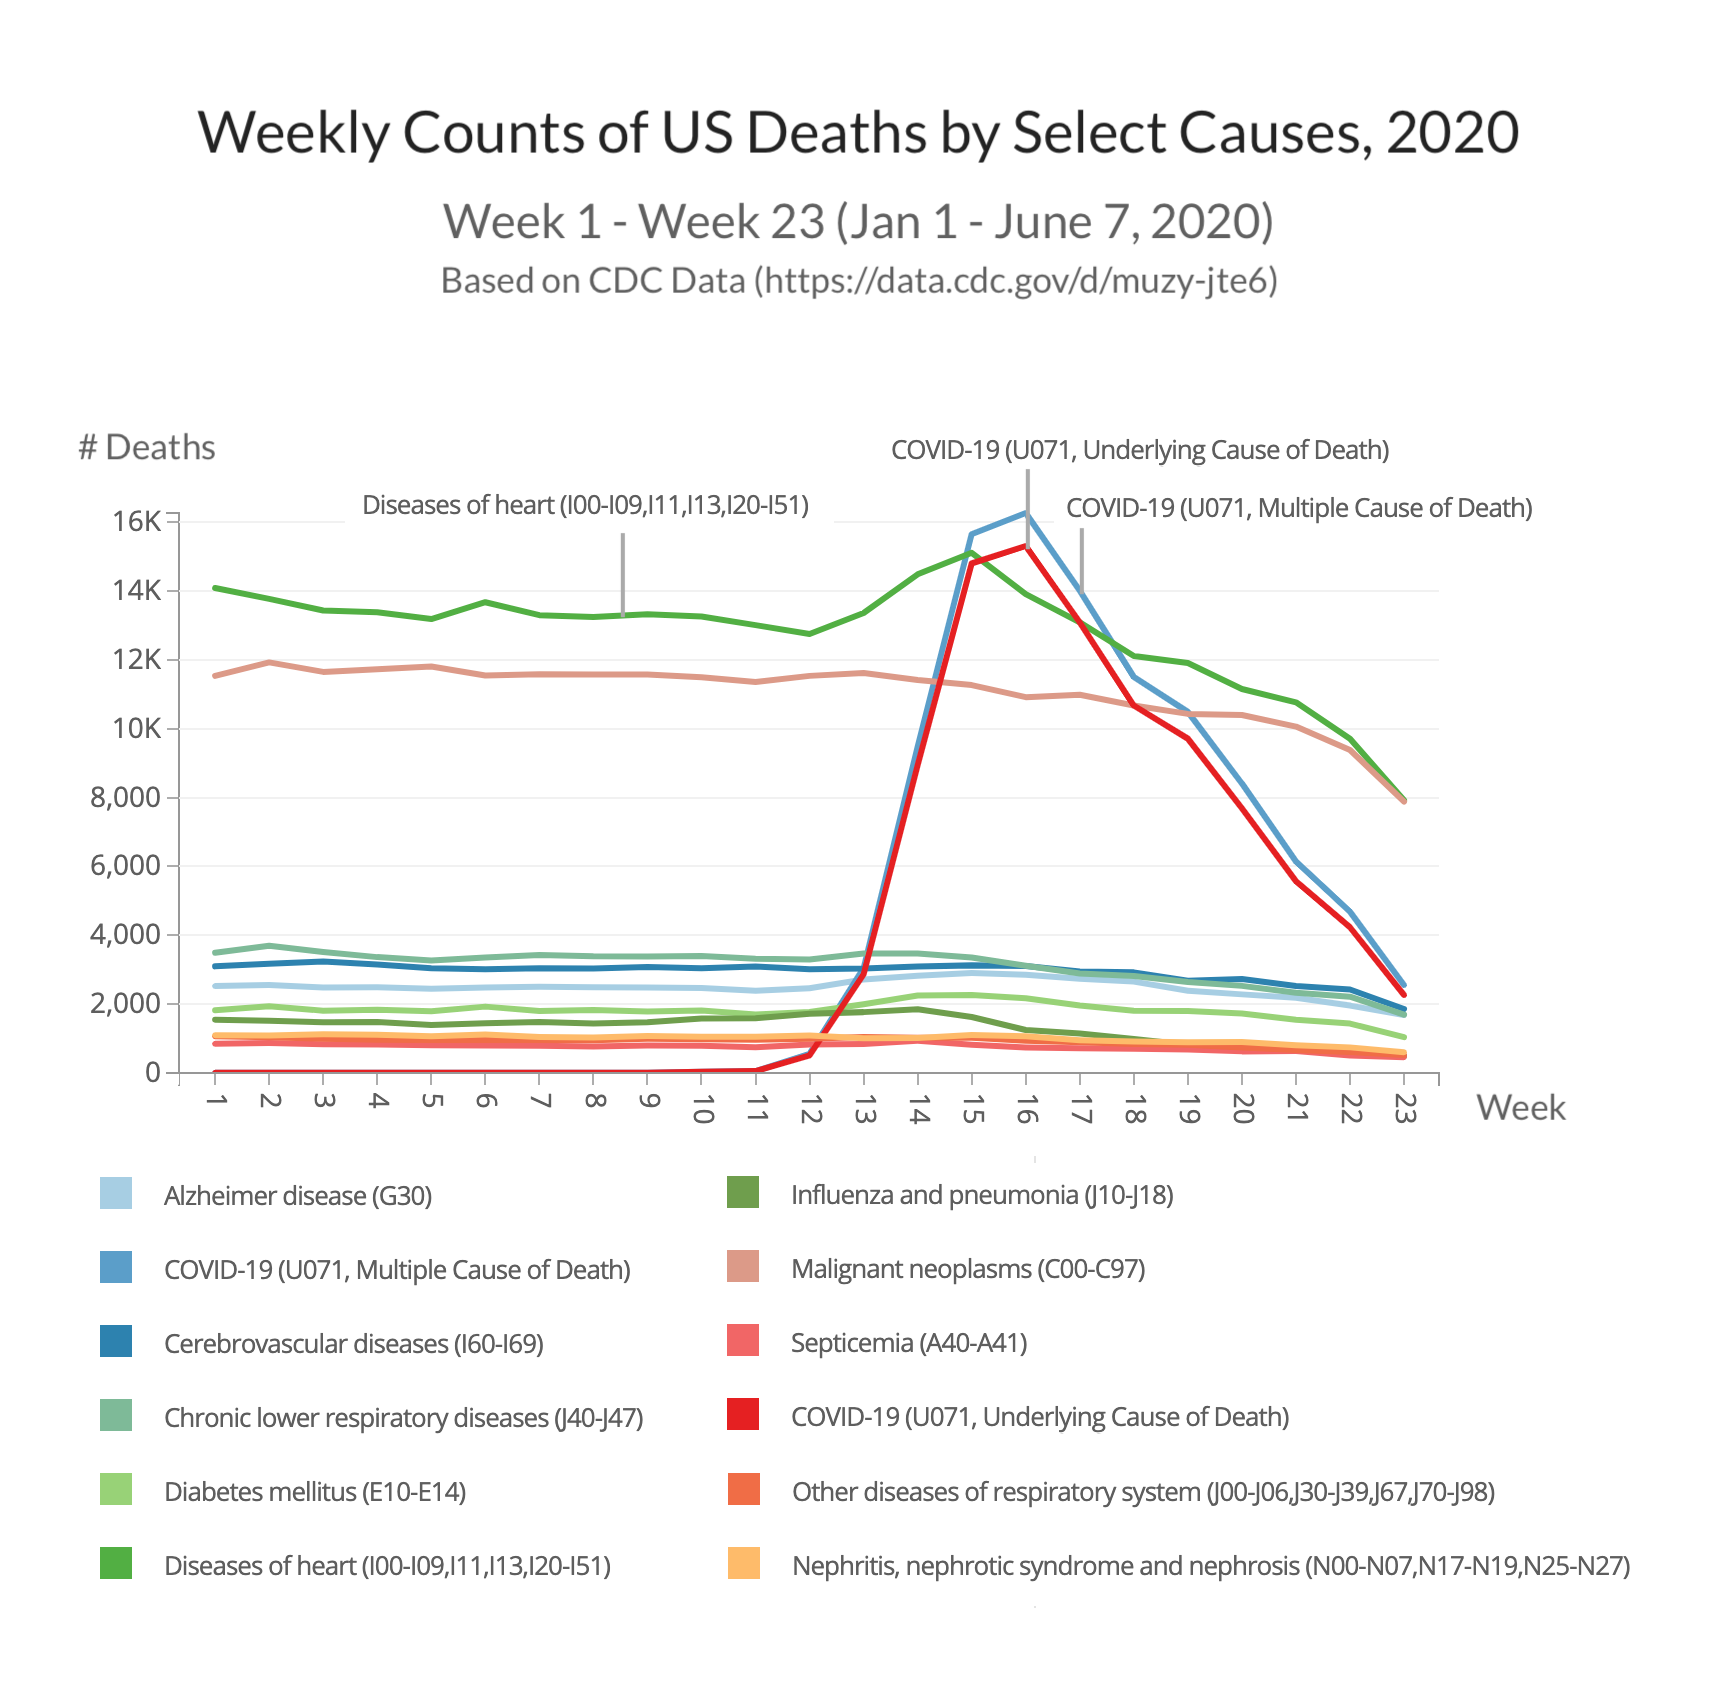 Weekly Counts of US Deaths by Select Causes through June 2020